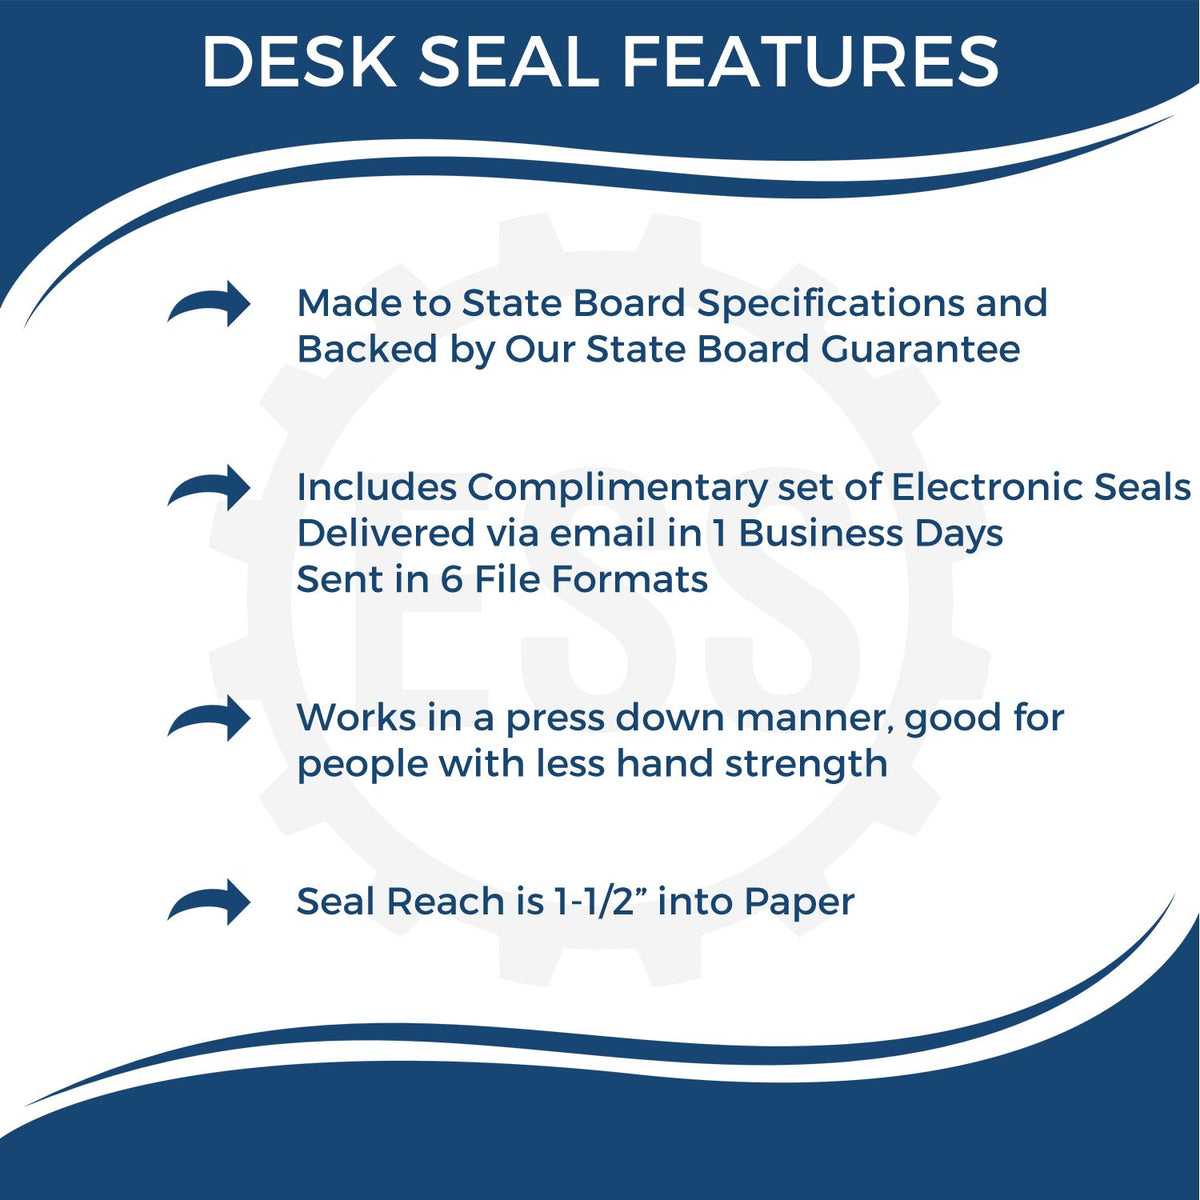 A picture of an infographic highlighting the selling points for the Connecticut Engineer Desk Seal